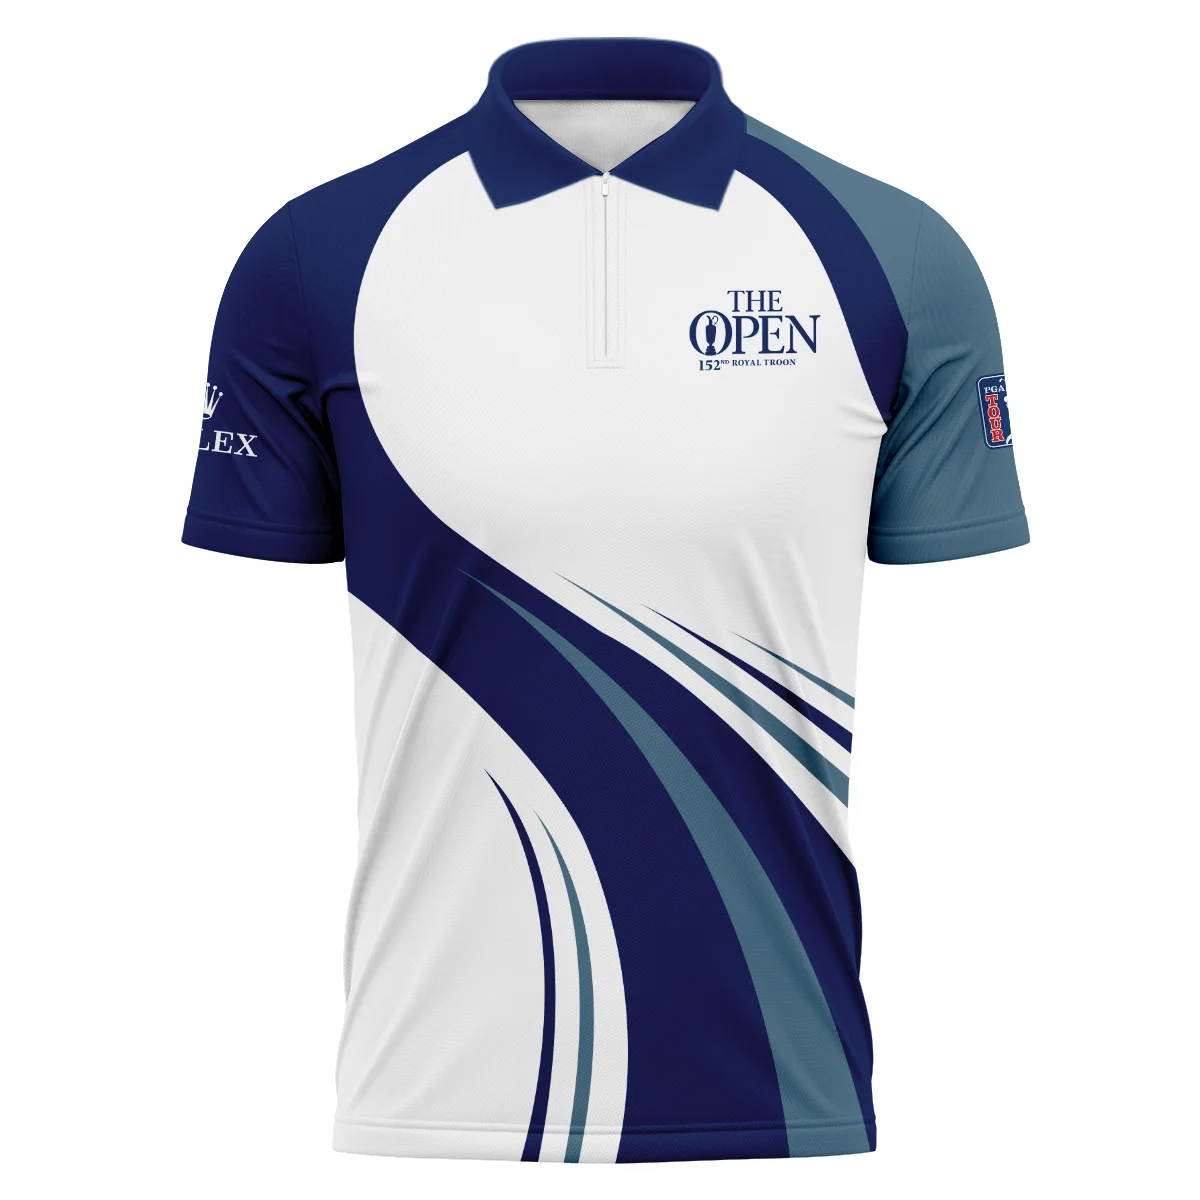 152nd Open Championship Rolex White Mostly Desaturated Dark Blue Zipper Polo Shirt All Over Prints HOTOP270624A02ROXZPL